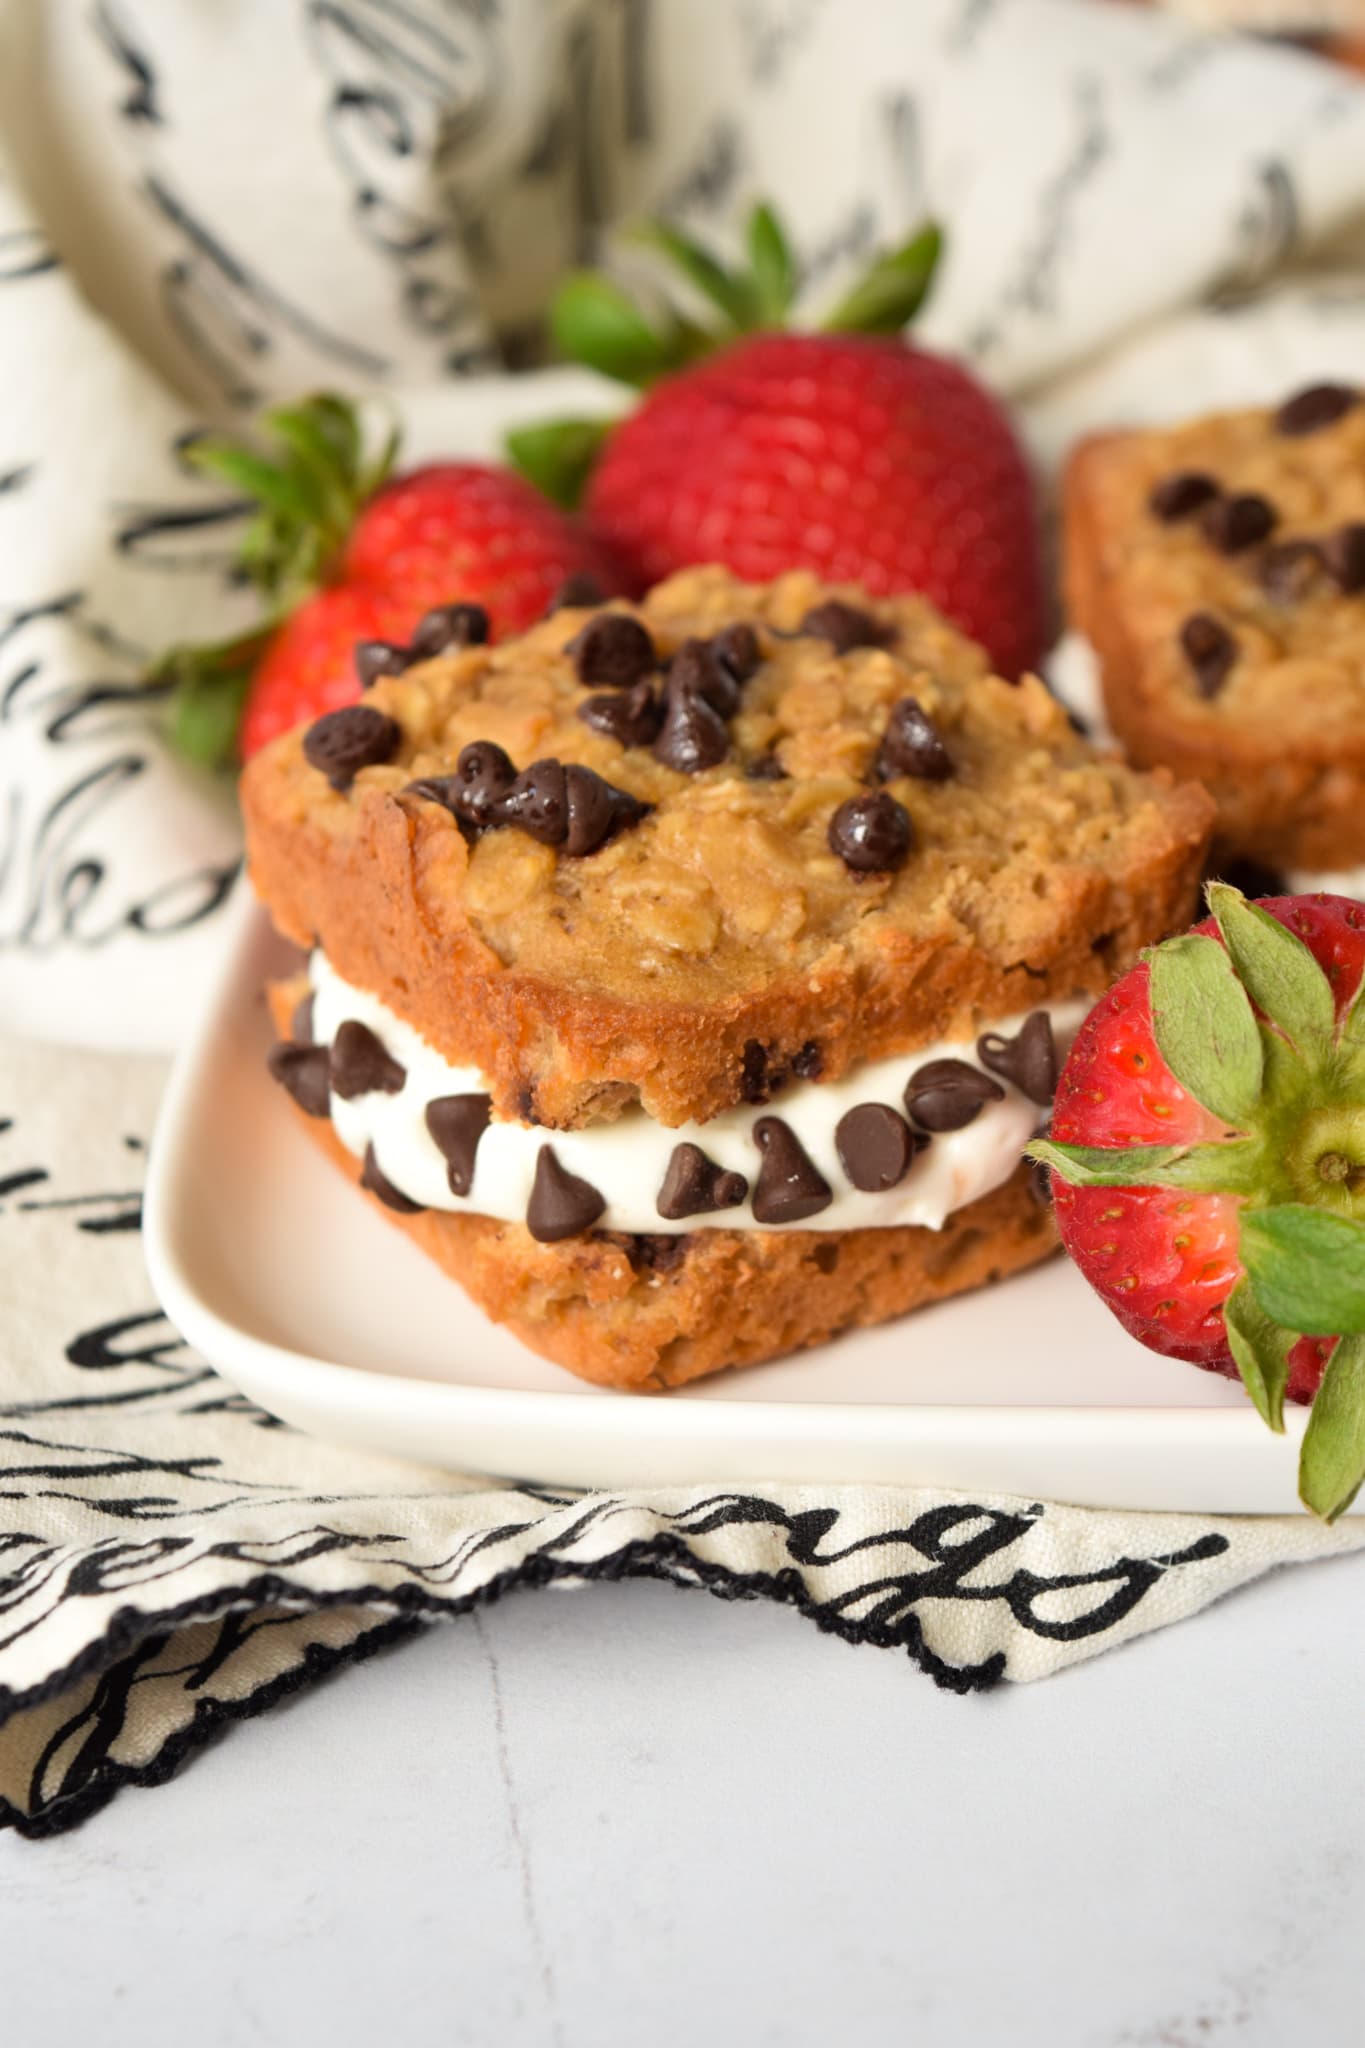 Healthy baked oatmeal with chocolate chips